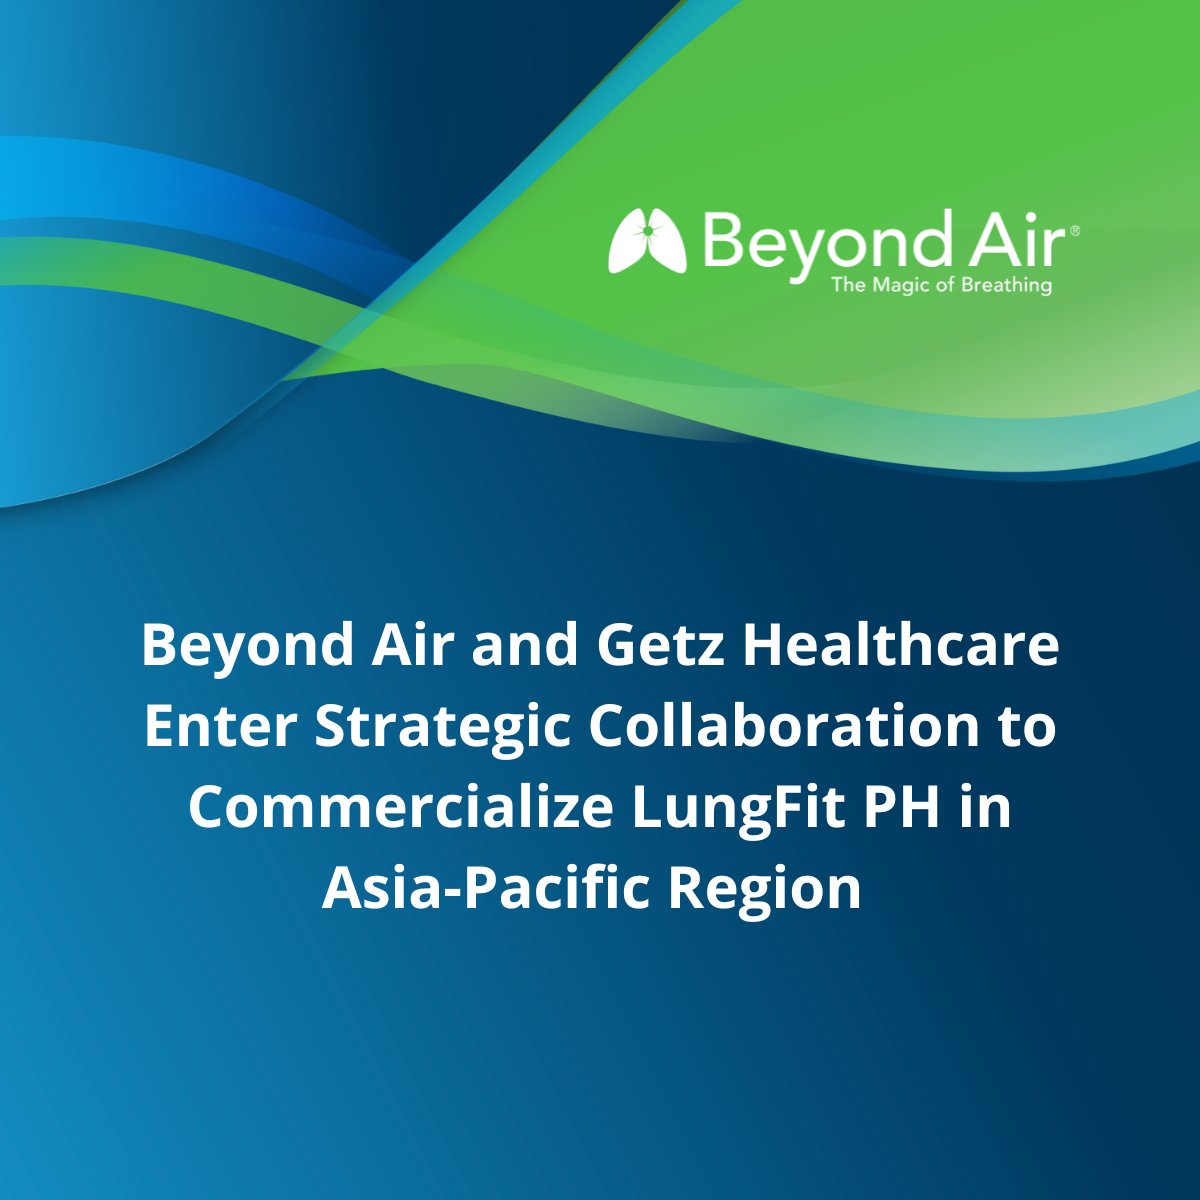 Beyond Air announced that it has entered into an agreement with @GetzHC_ANZ to commercialize the LungFit PH device in certain countries across the Asia-Pacific region. Learn more: beyondair.net/news-events/pr…. #NitricOxide #GetzHealthcare